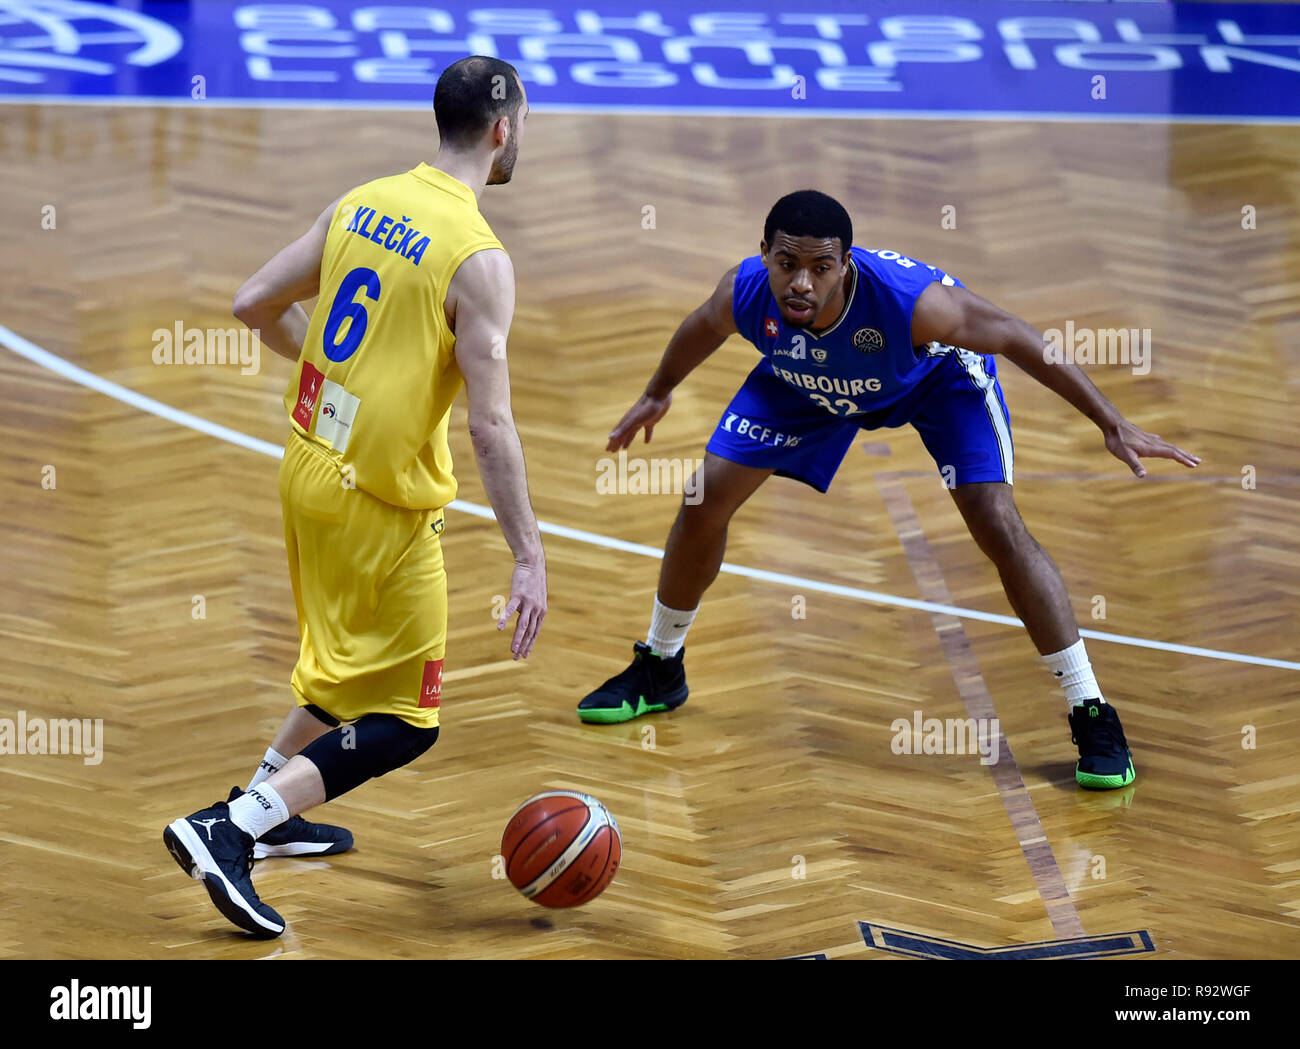 Opava, Czech Republic. 19th Dec, 2018. From left RADIM KLECKA of Opava and  JUSTIN ROBERSON of Fribourg in action during the Men's basketball Champions  League 9th round match, B Group Opava vs.